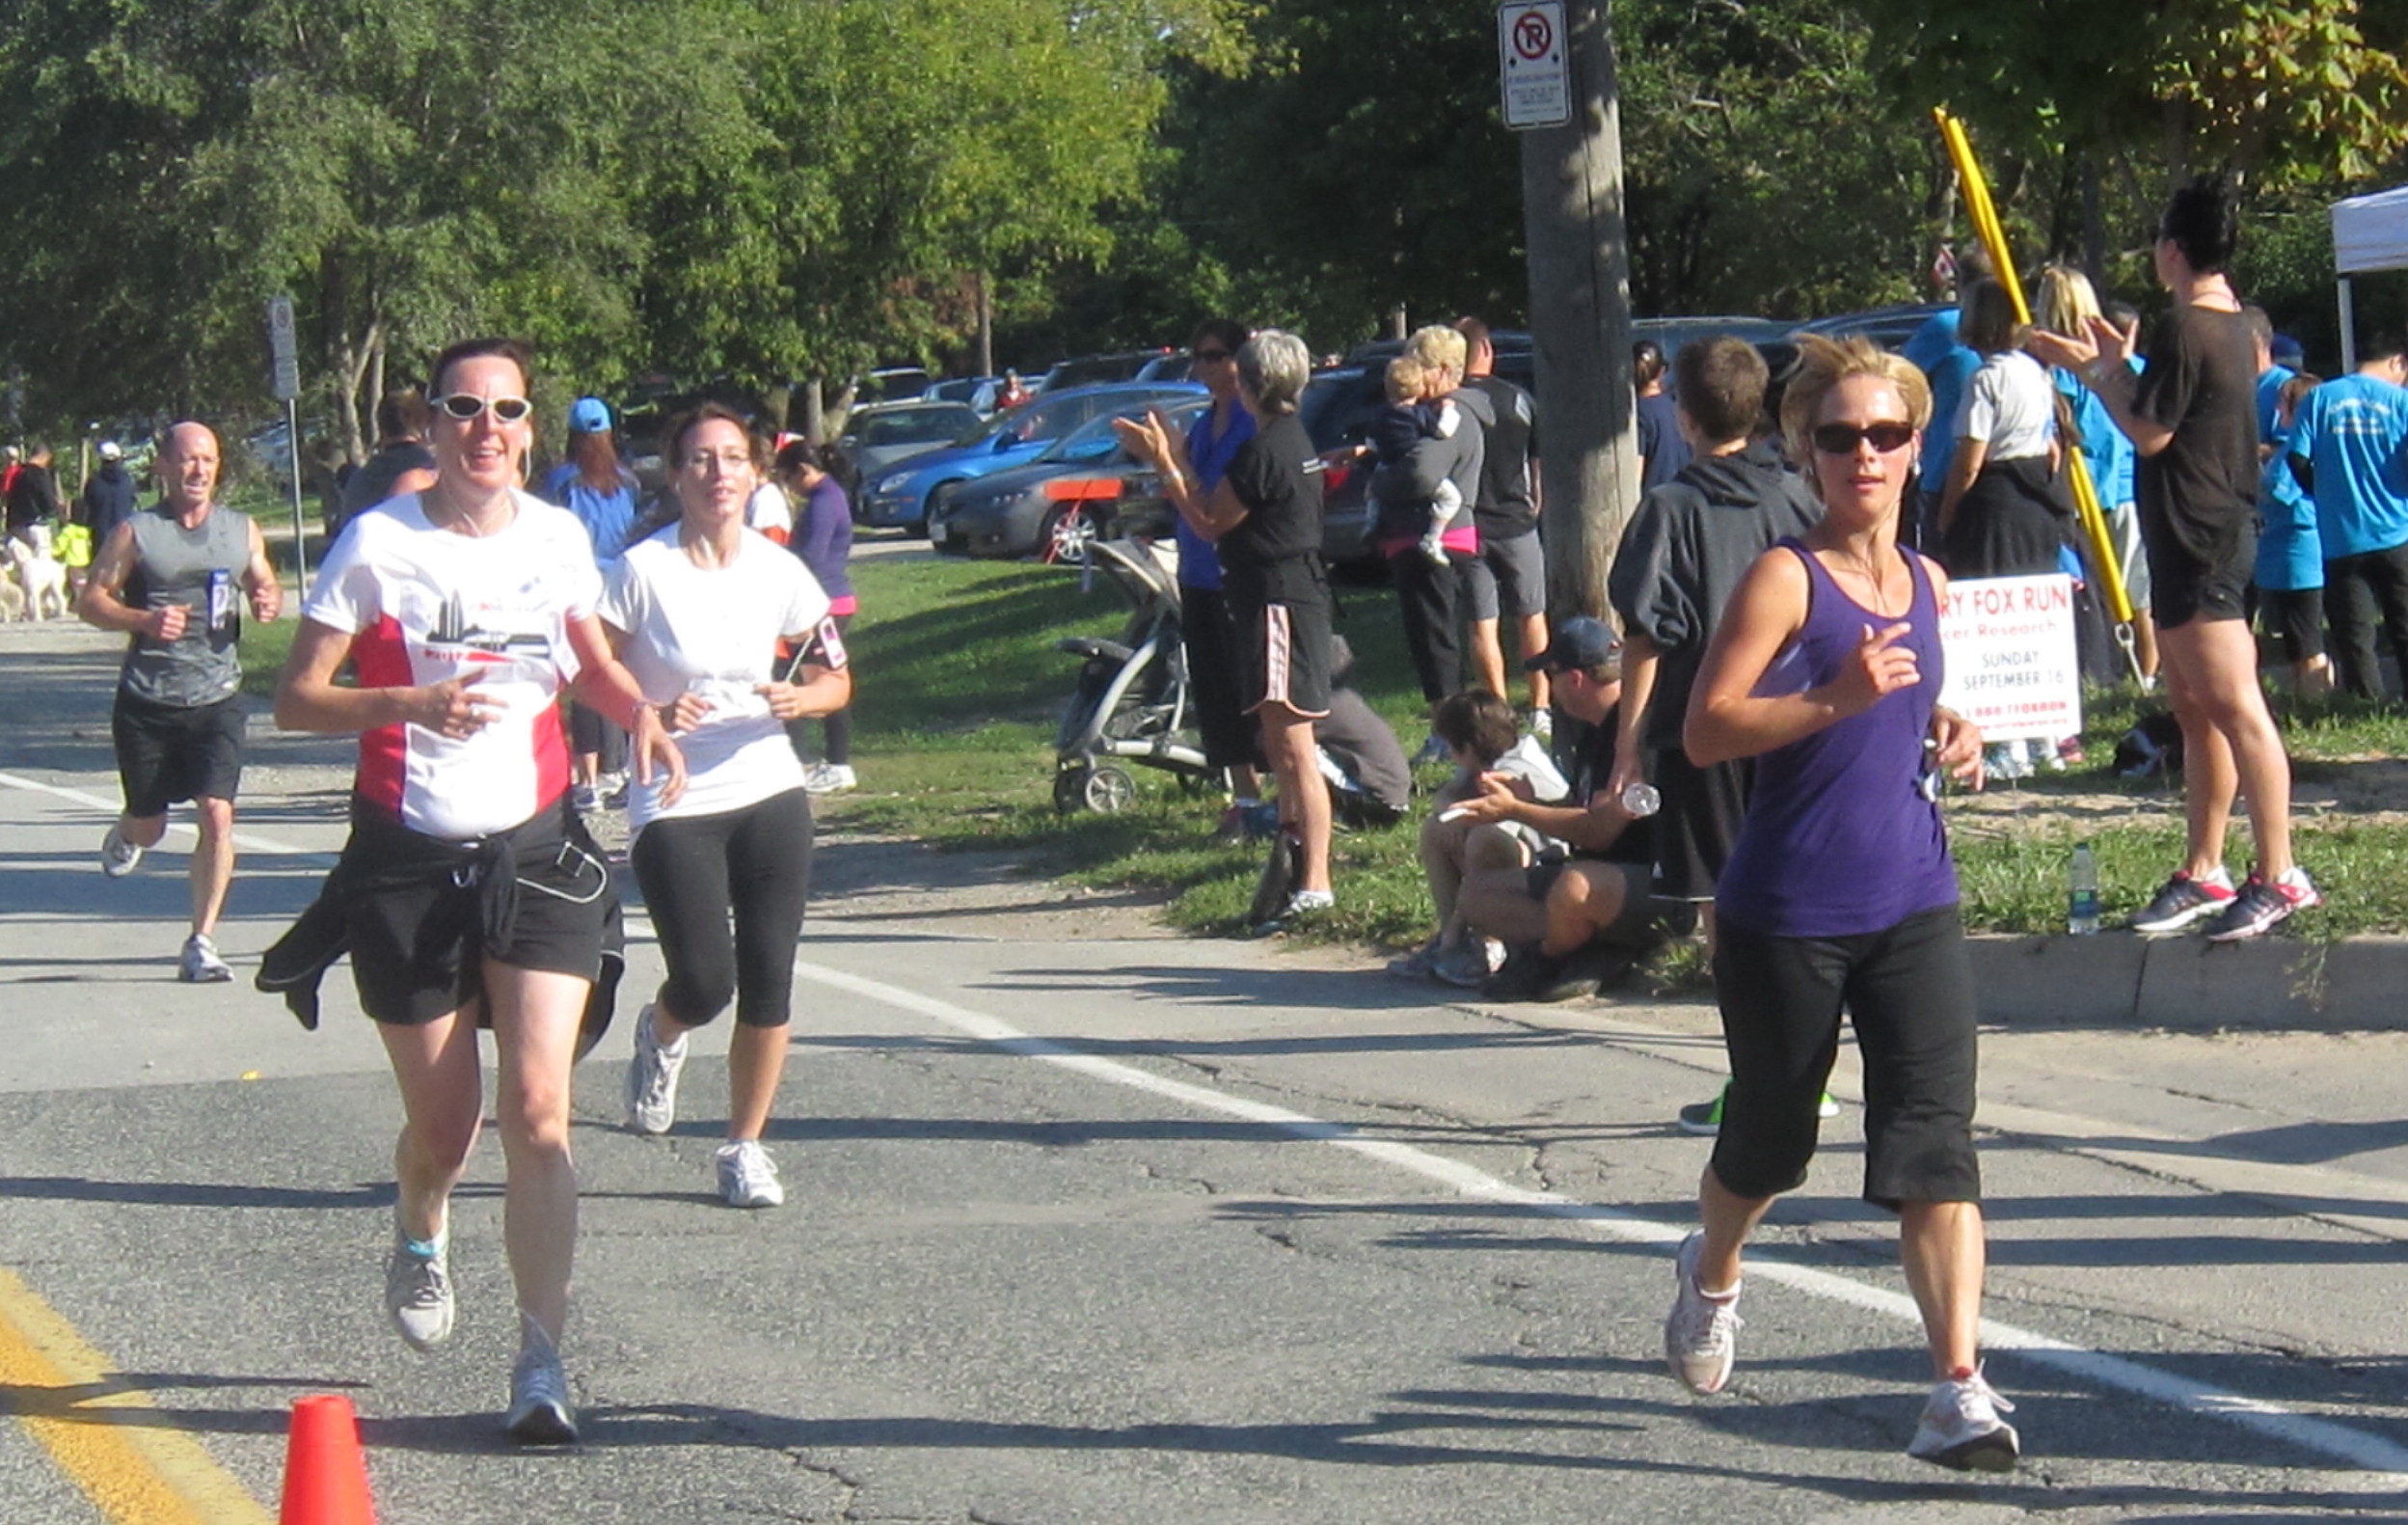 EAch of these woman had their own reasons for running this race and each ran it in their own way. Hundreds did just this during the Terry Fox Run for cancer research